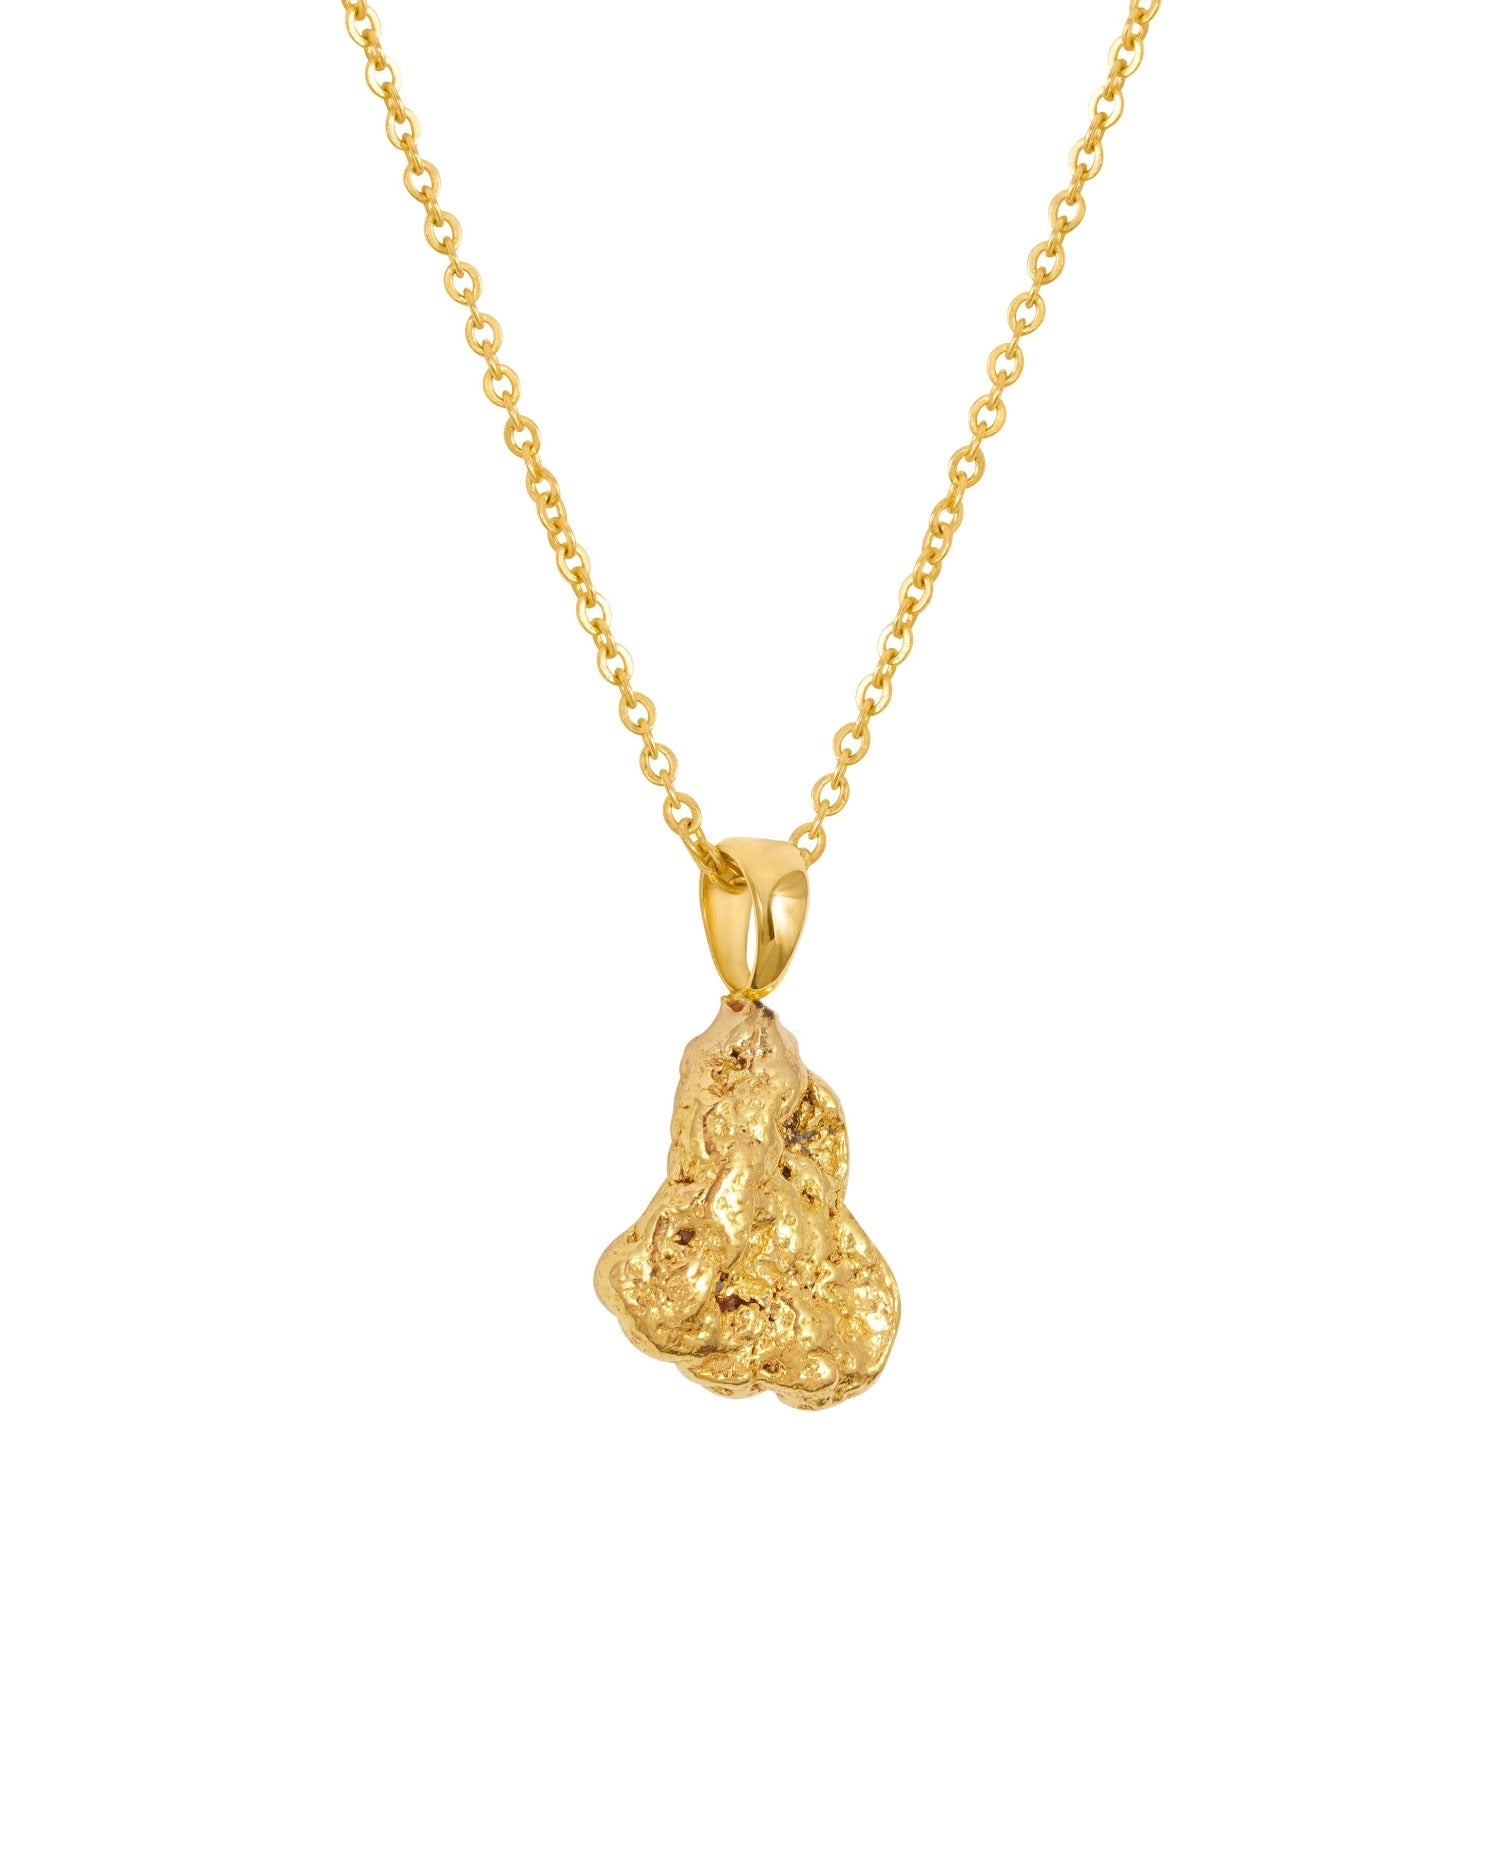 24ct gold nugget charm necklace 3.2